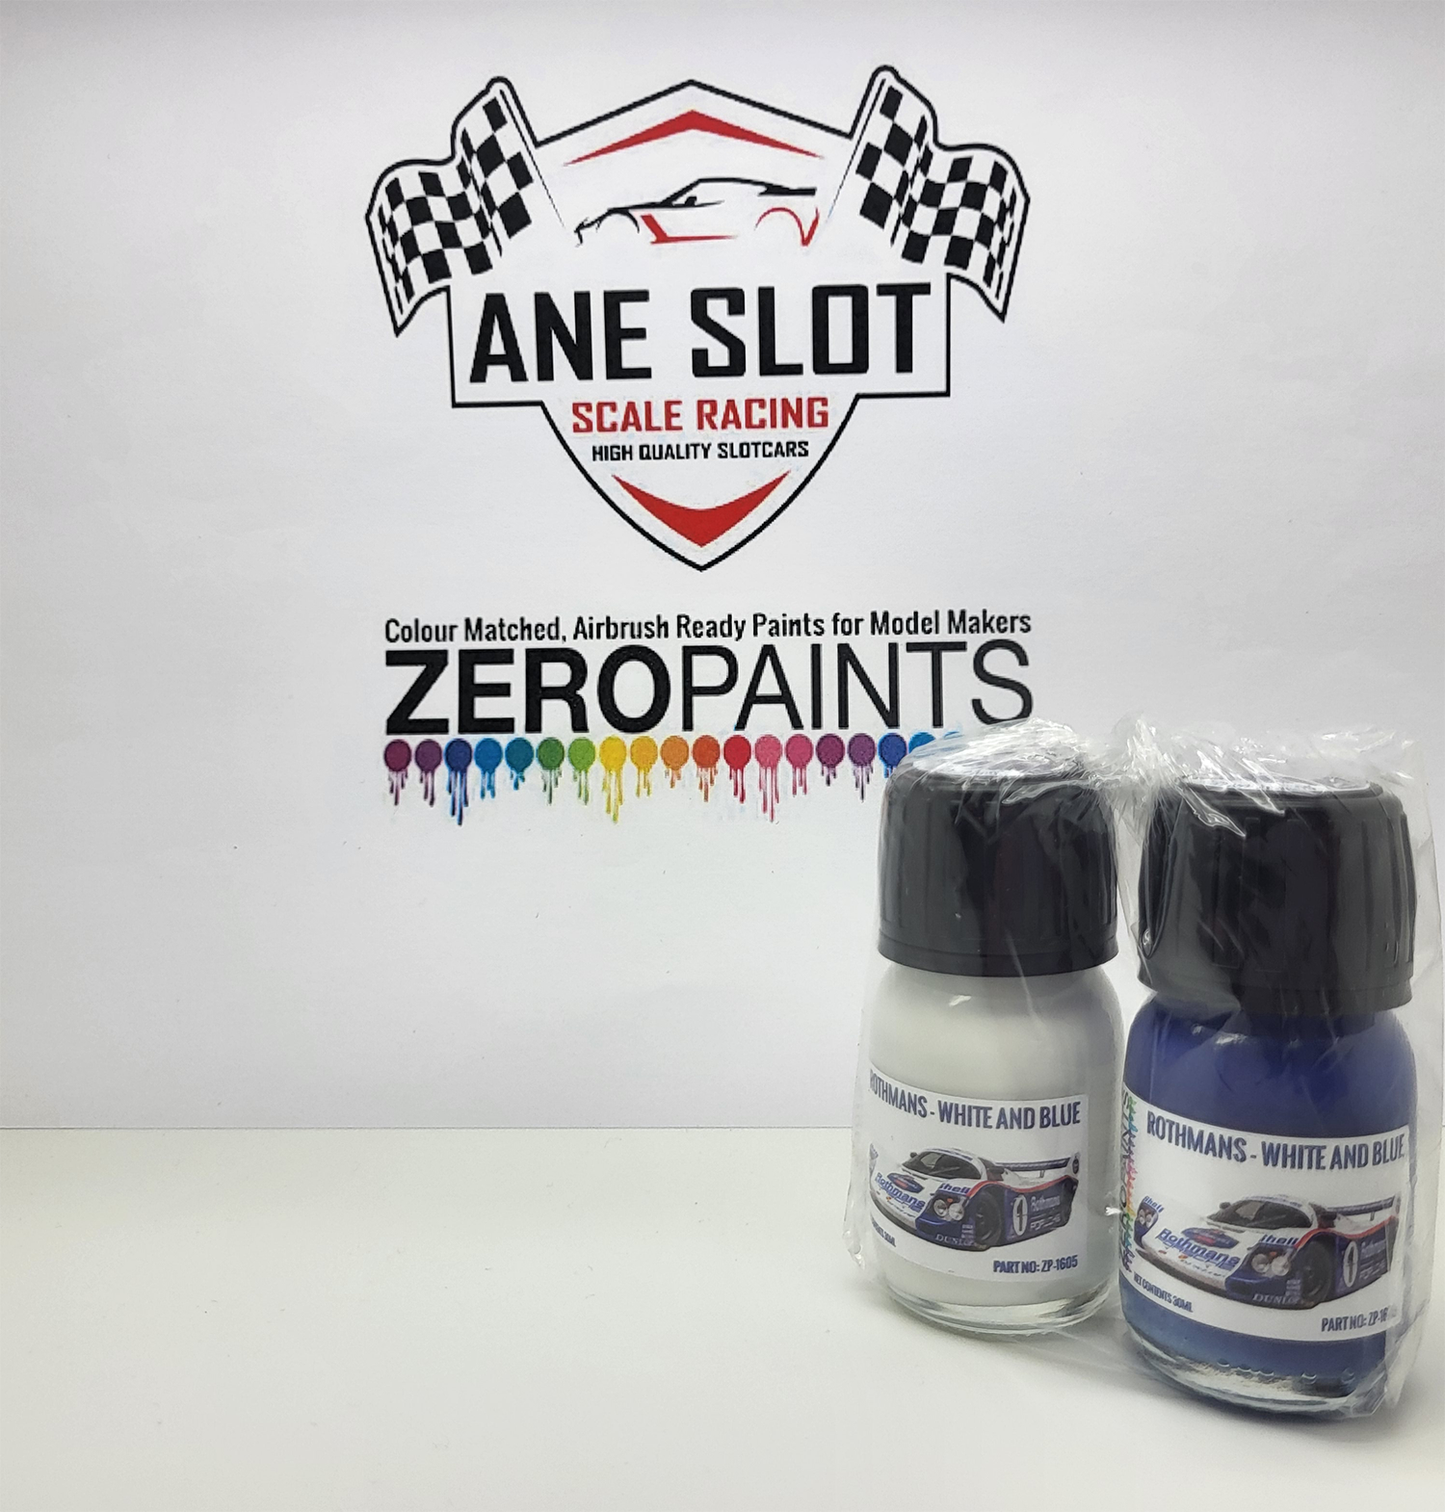 Zeropaints ZP-1605 - " Rothmans White and Blue